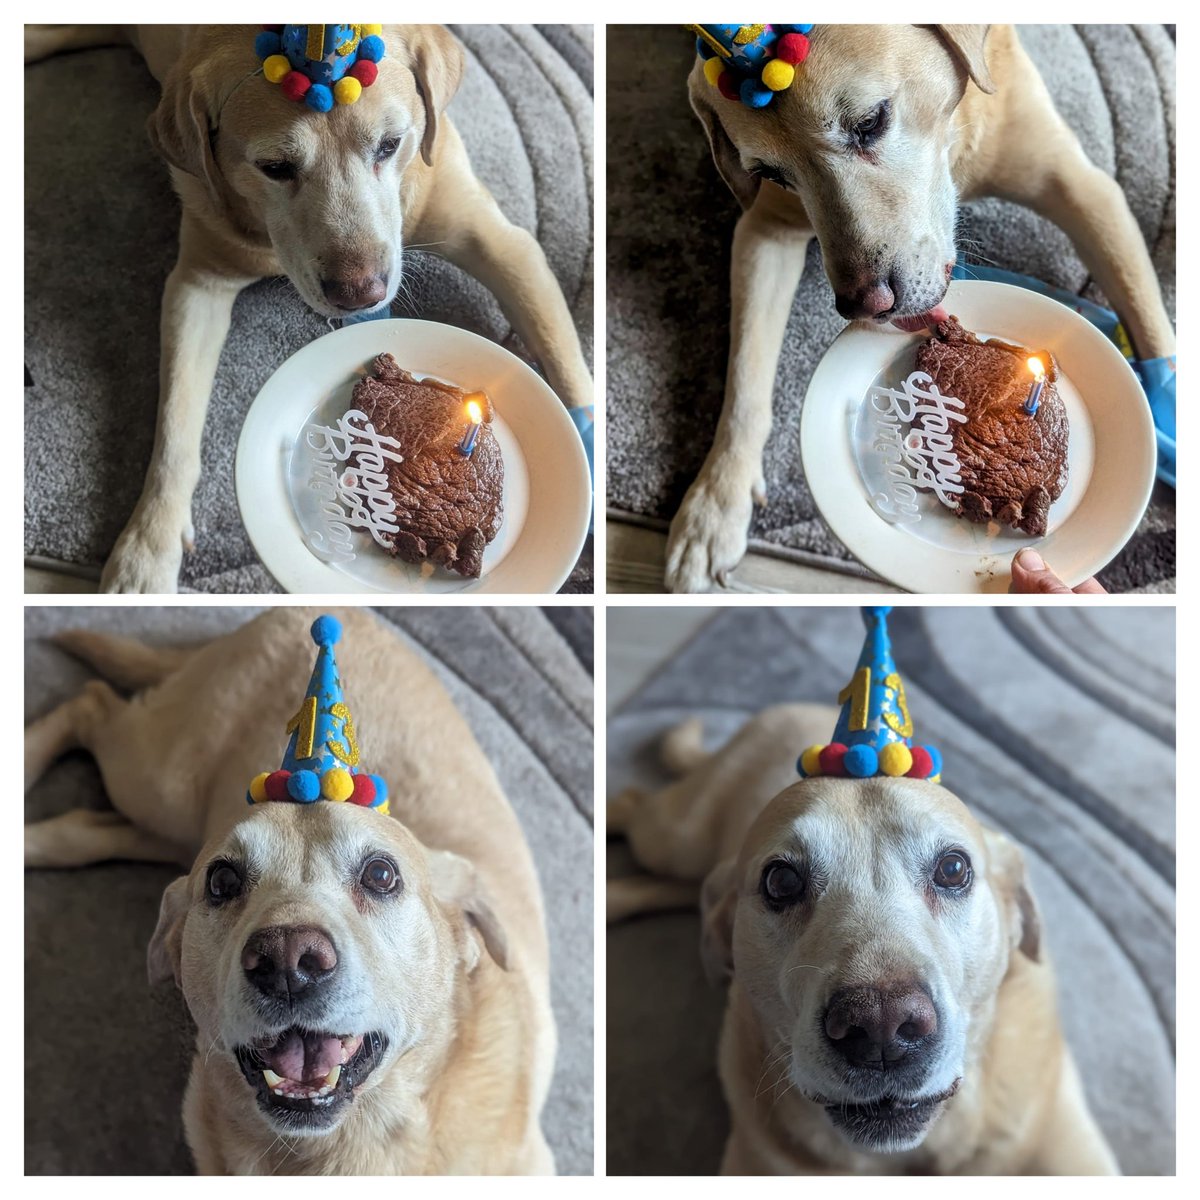 Happy 13th Birthday Alfie 🎉 

Alfie sends his heartfelt gratitude for all the birthday wishes! Just look at that beaming smile as he enjoys his birthday steak 🥩🤤❤️

#dogsoftwitter #dogs #dog #labrador #HappyBirthday